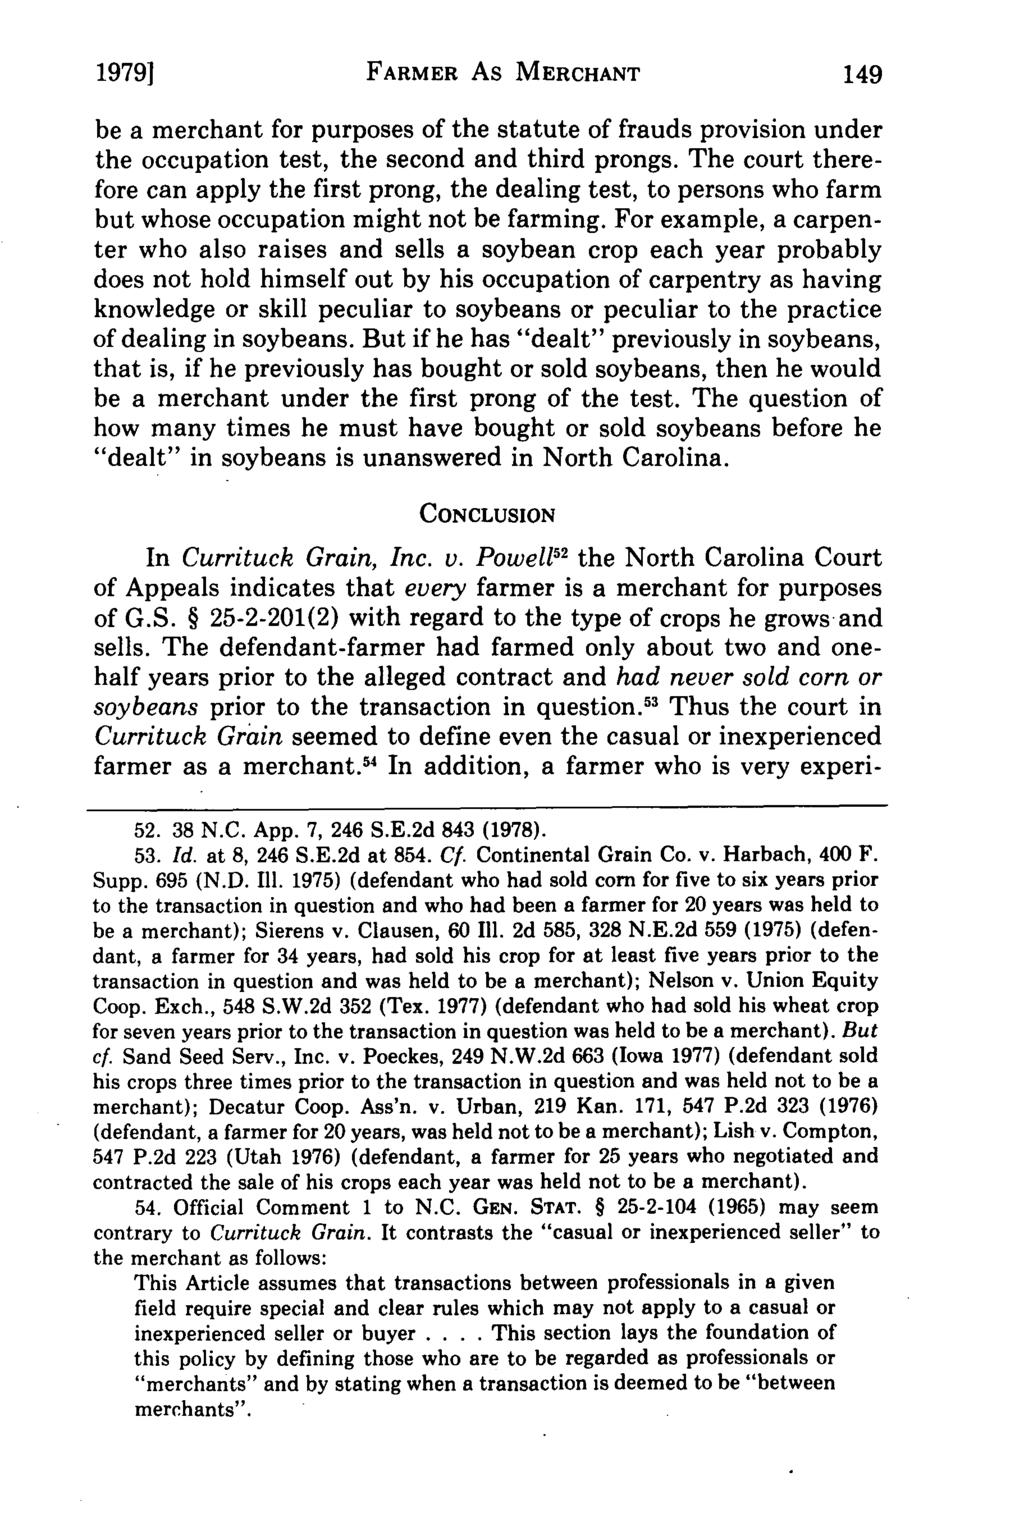 19791 Massey: Uniform Commercial Code - Farmers as Merchants in North Carolina FARMER As MERCHANT be a merchant for purposes of the statute of frauds provision under the occupation test, the second